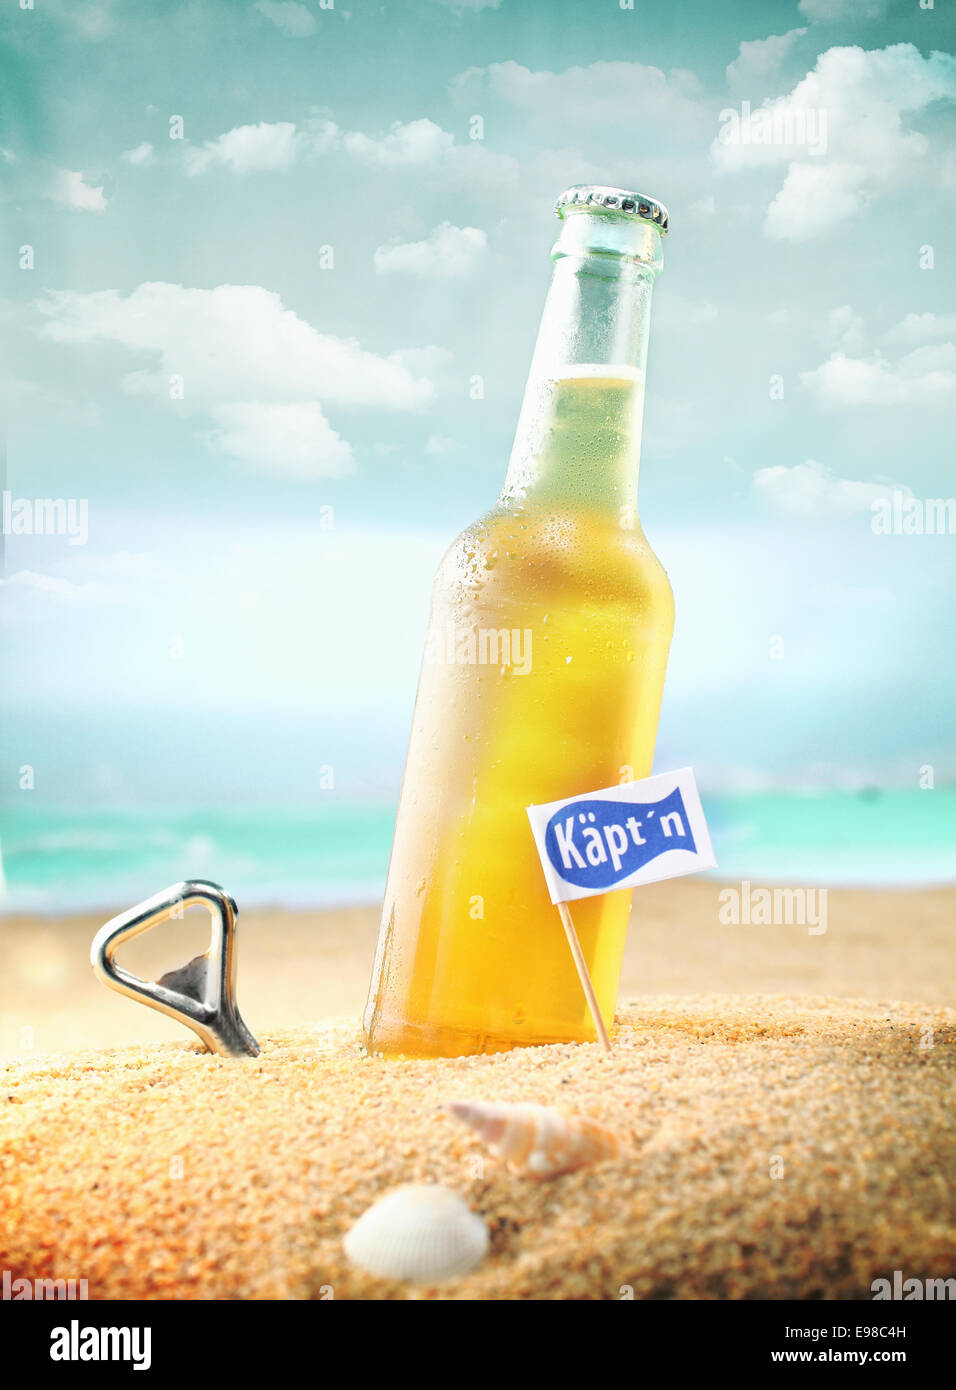 Beautiful photo of a chilled beer and a bottle opener on the beach tagged as Kapt'n. Stock Photo